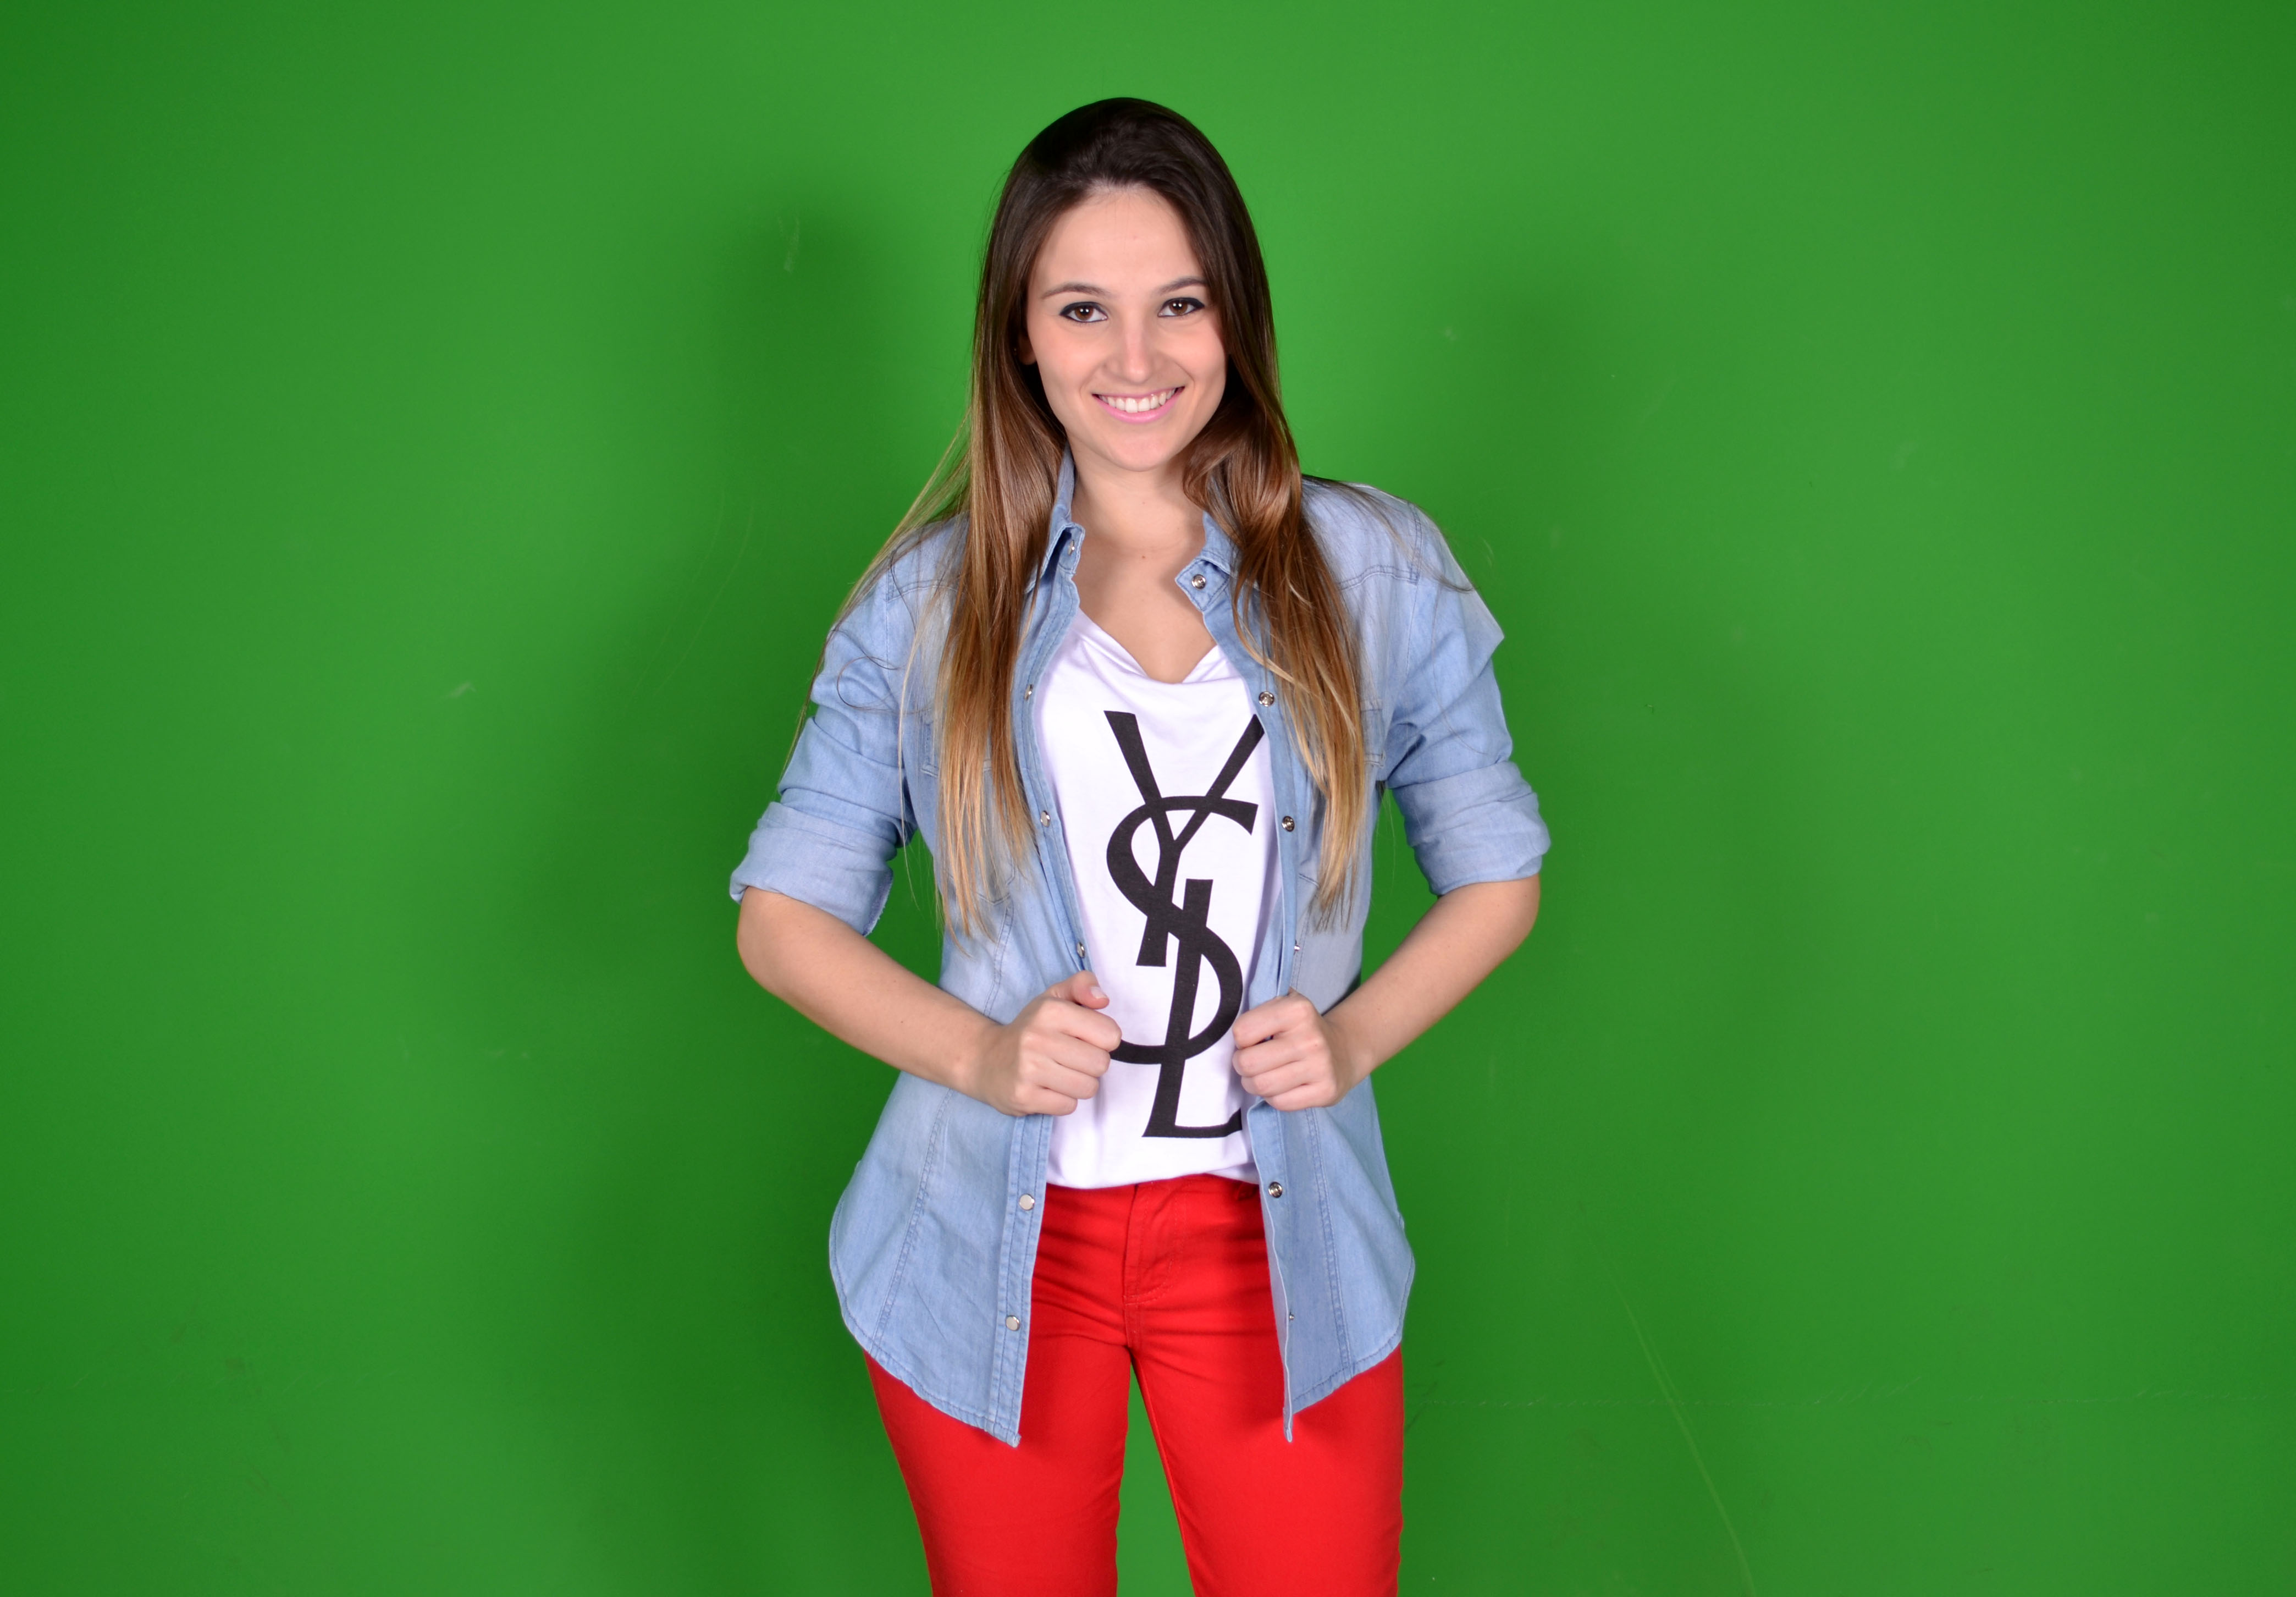 Look Impactto: T-shirt YSL + camisa jeans + red pants